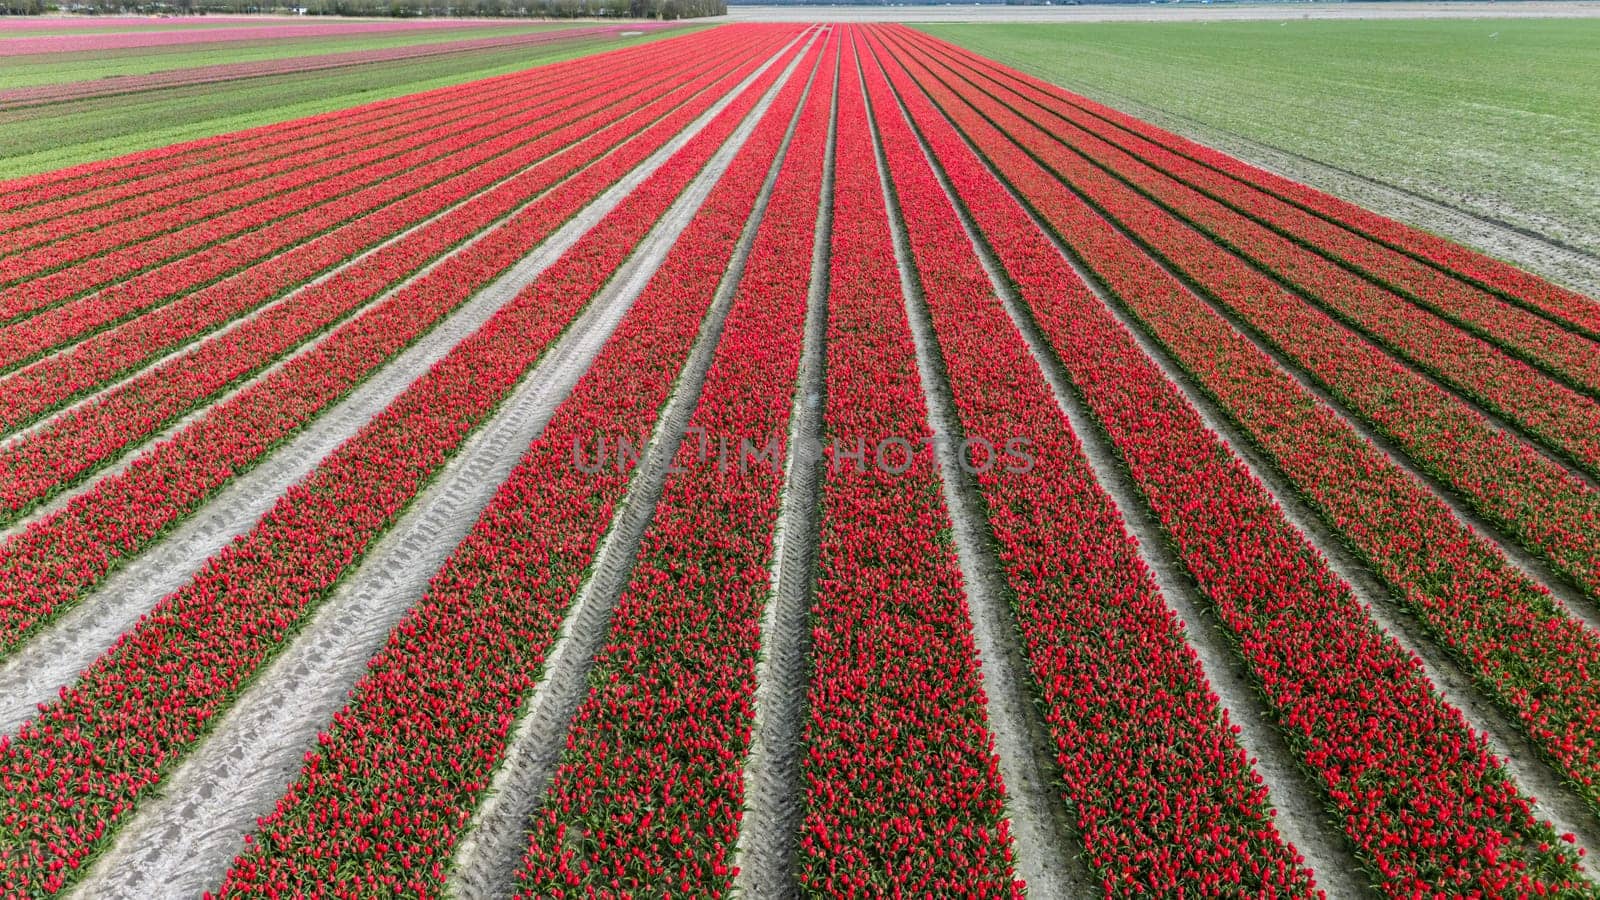 red tulip fields in spring in the netherlands dronehoto by compuinfoto